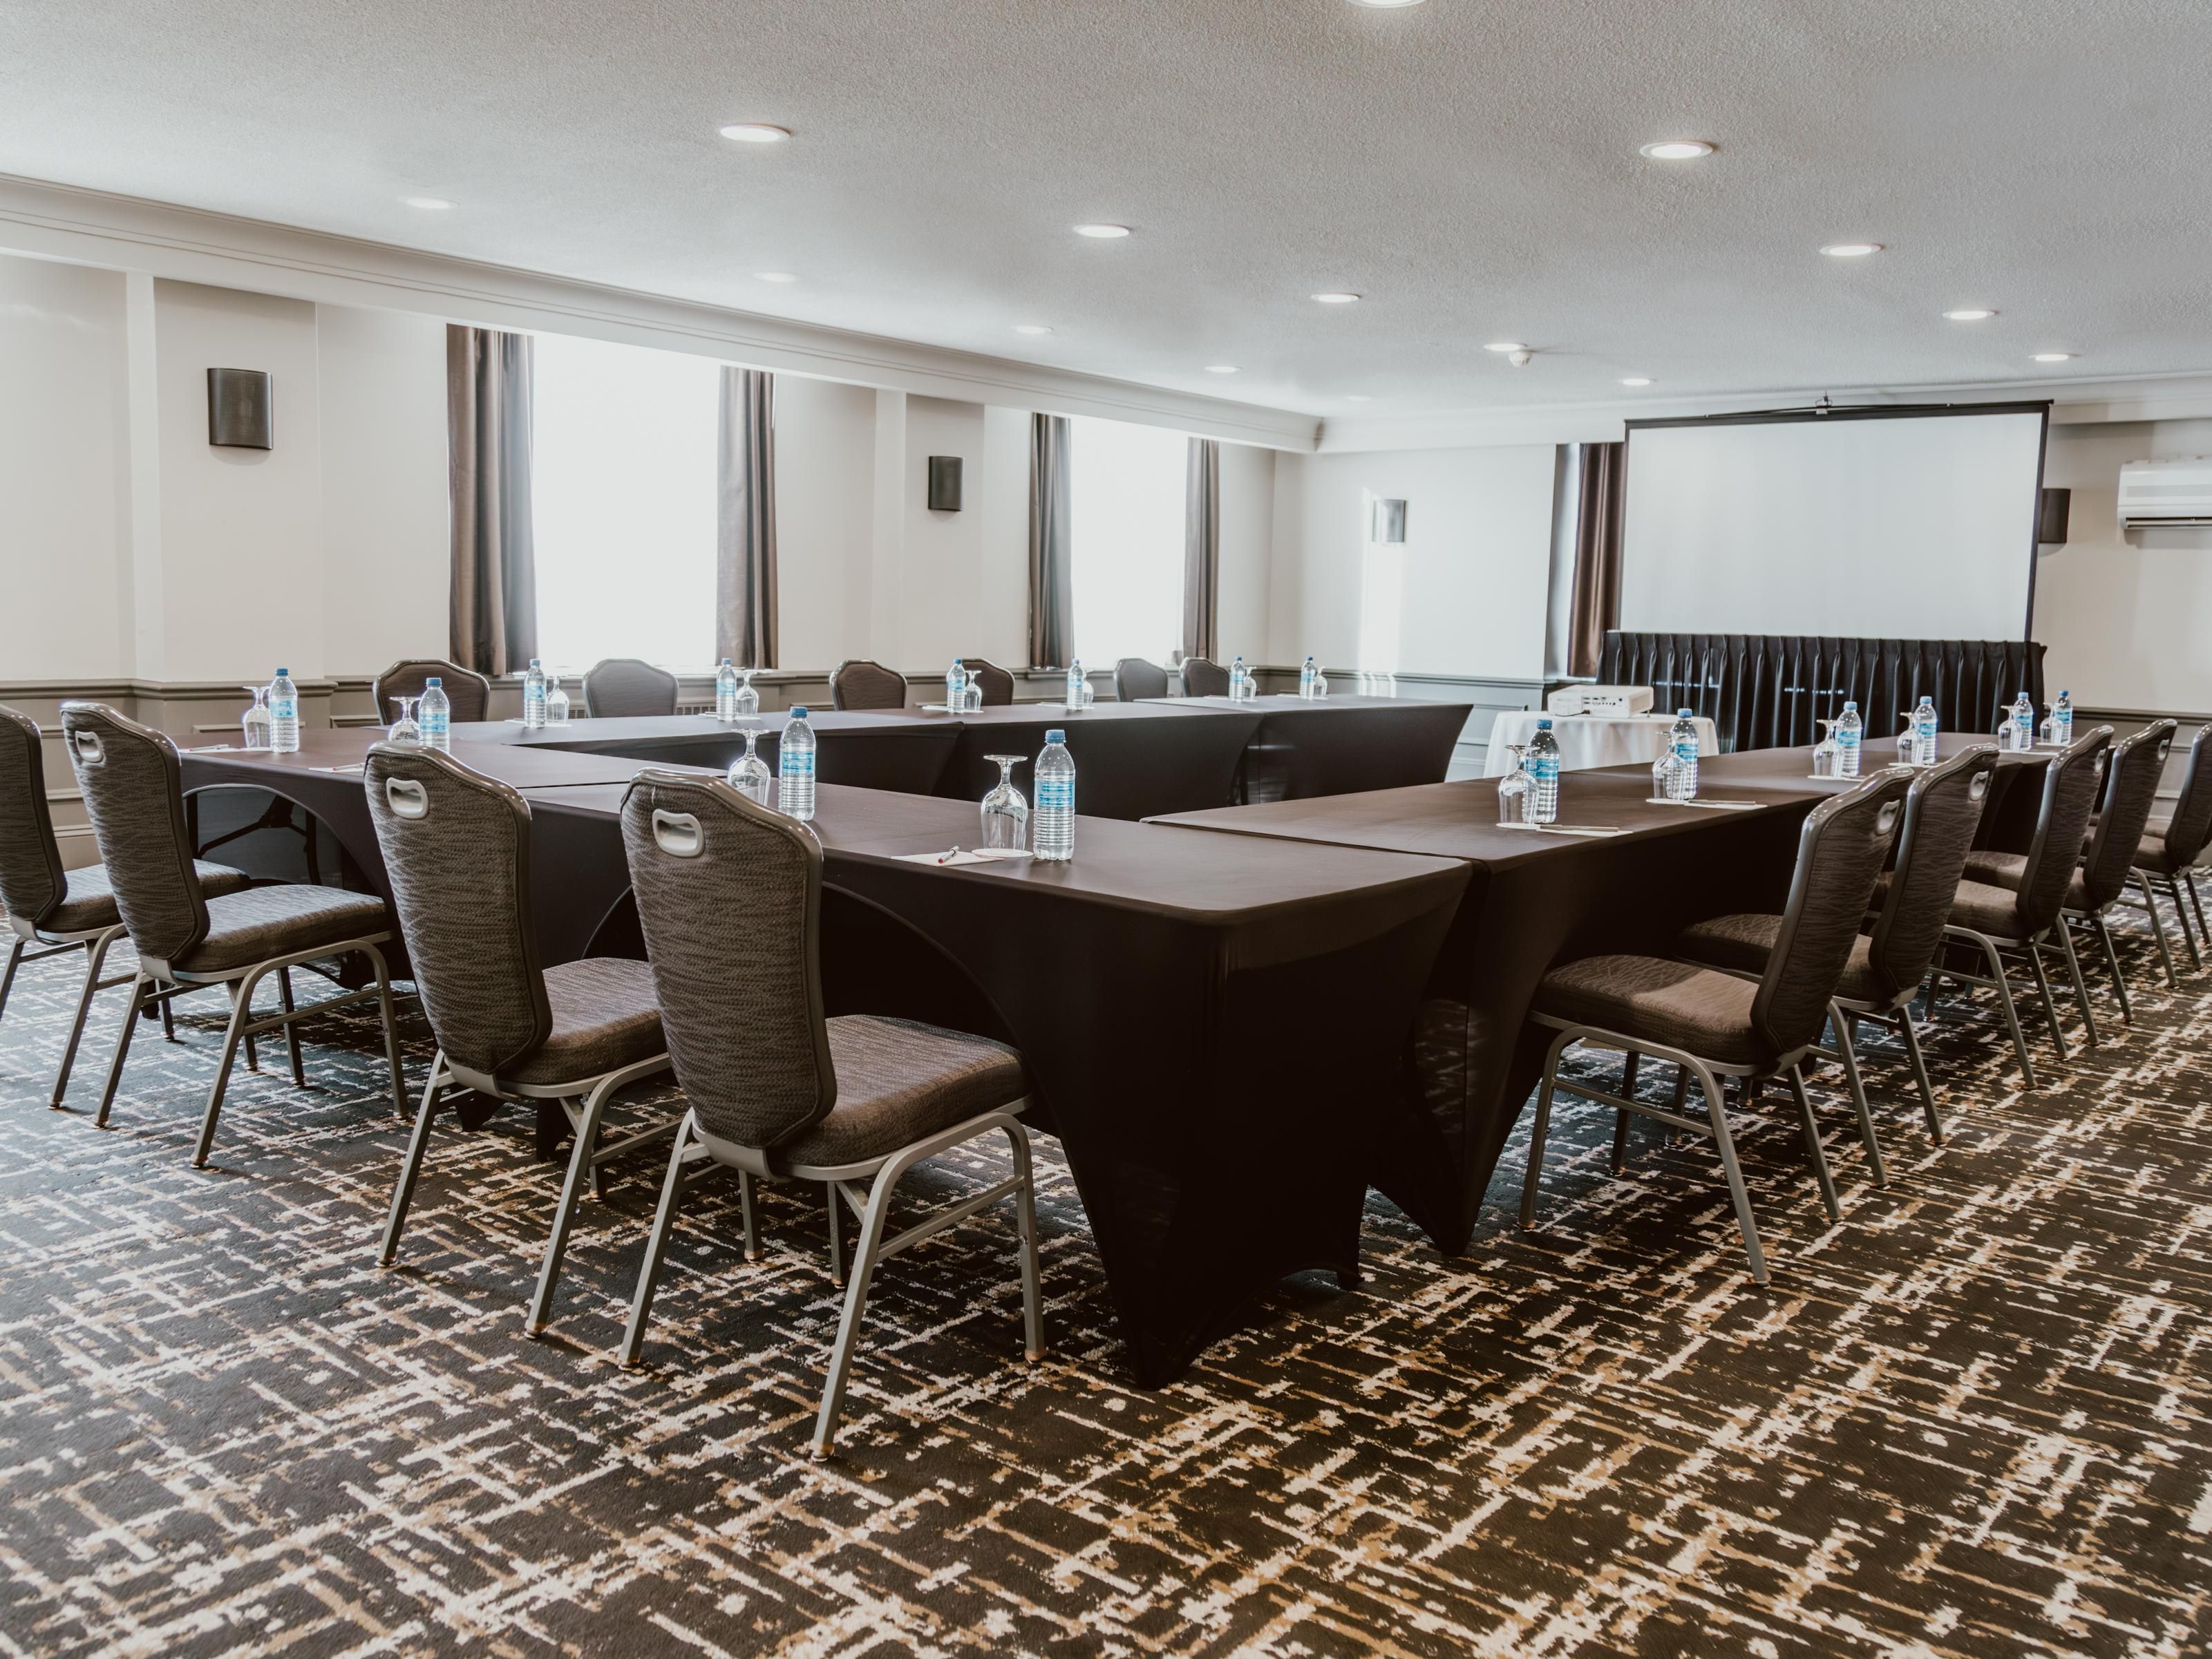 Step into our modern meeting spaces and enjoy delicious meals crafted by our talented chef. Whether it's a morning brainstorm, a lunch meeting, or a dinner conference, we've got you covered! Impress your clients or colleagues by taking your meetings to the next level.